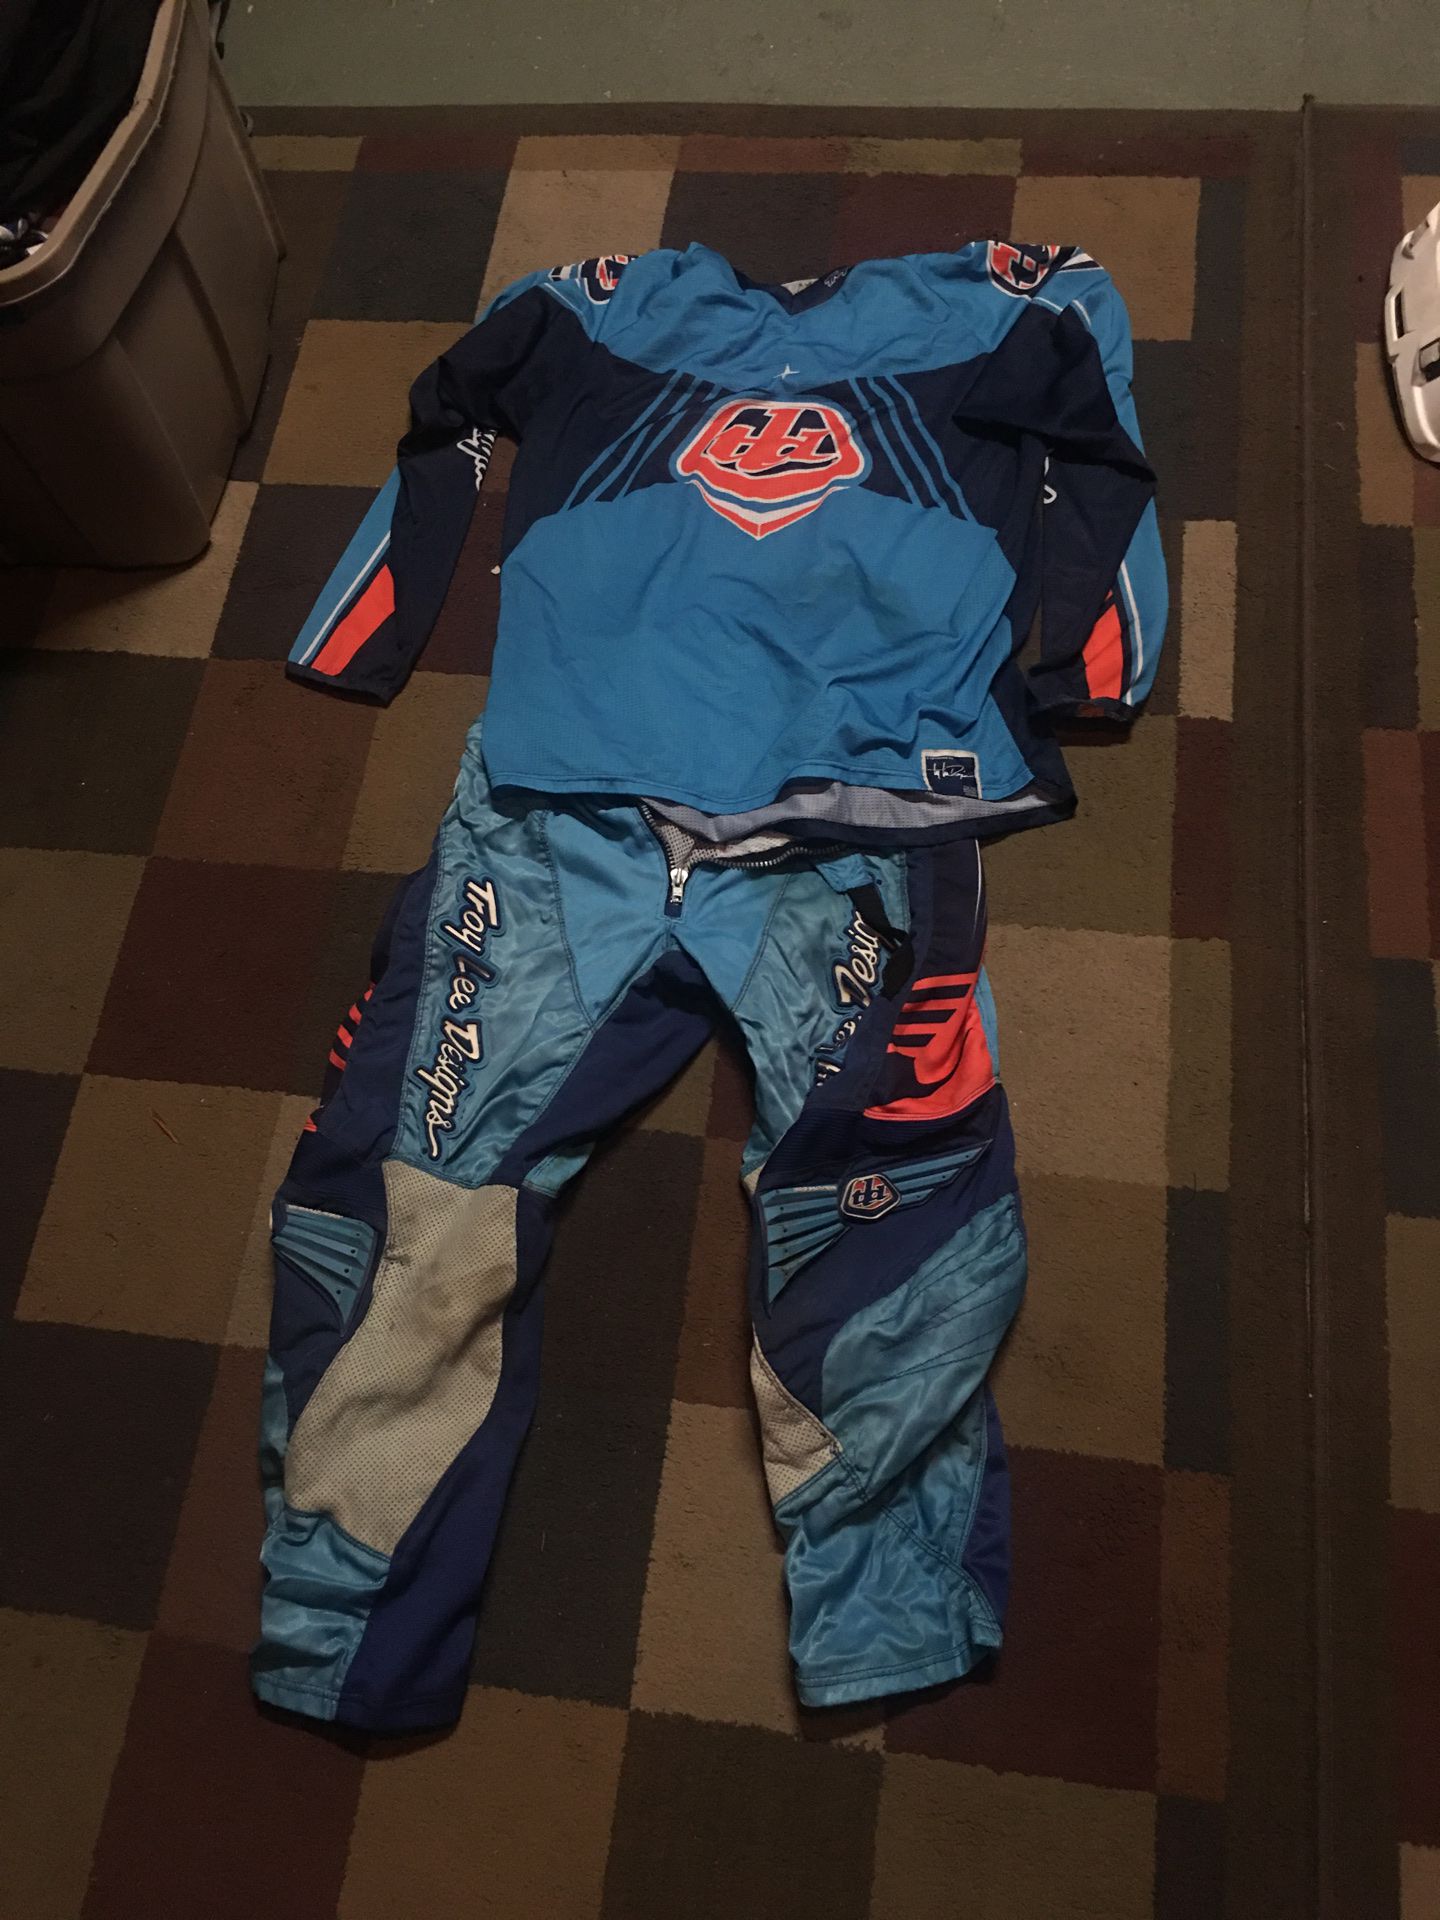 Troy lee design pants and jersey